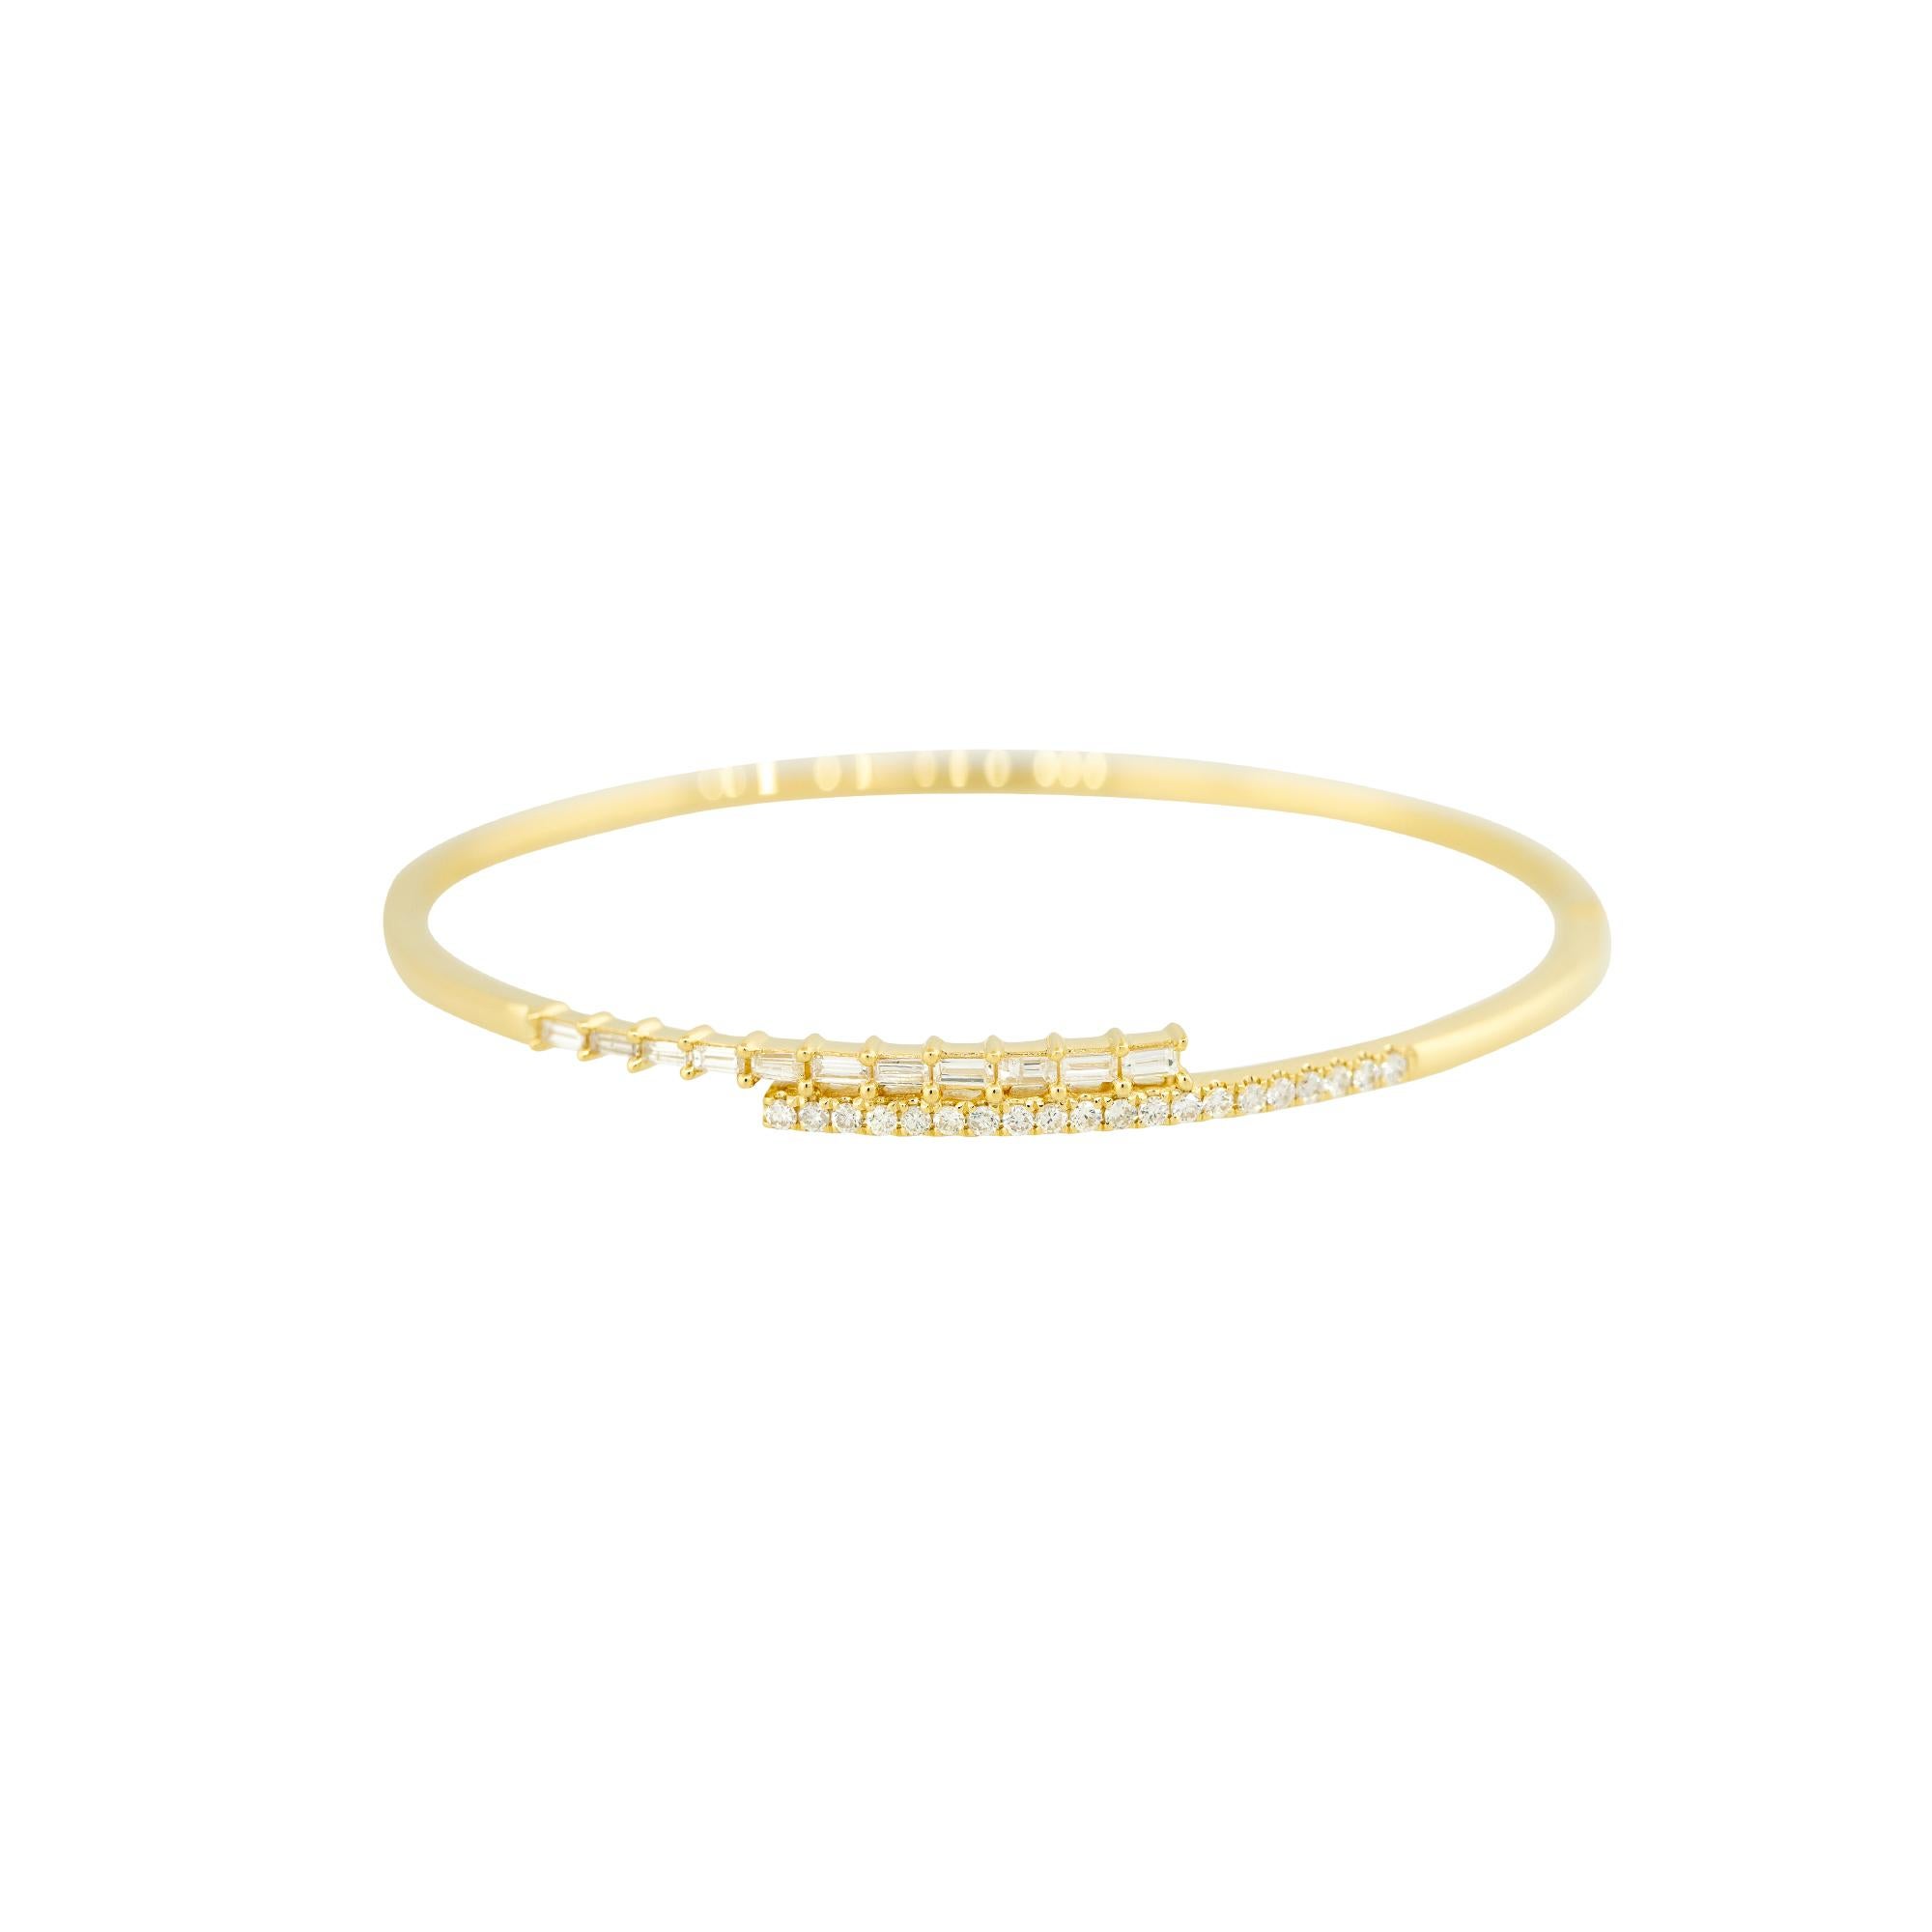 18k Yellow Gold 0.70ctw Round and Baguette Cut Diamond Cuff Bangle
Material: 18k Yellow Gold
Diamond Details: Approximately 0.70ctw of Round Brilliant and Baguette cut Diamonds. There is a row of round brilliant diamonds at one end of the bracelet